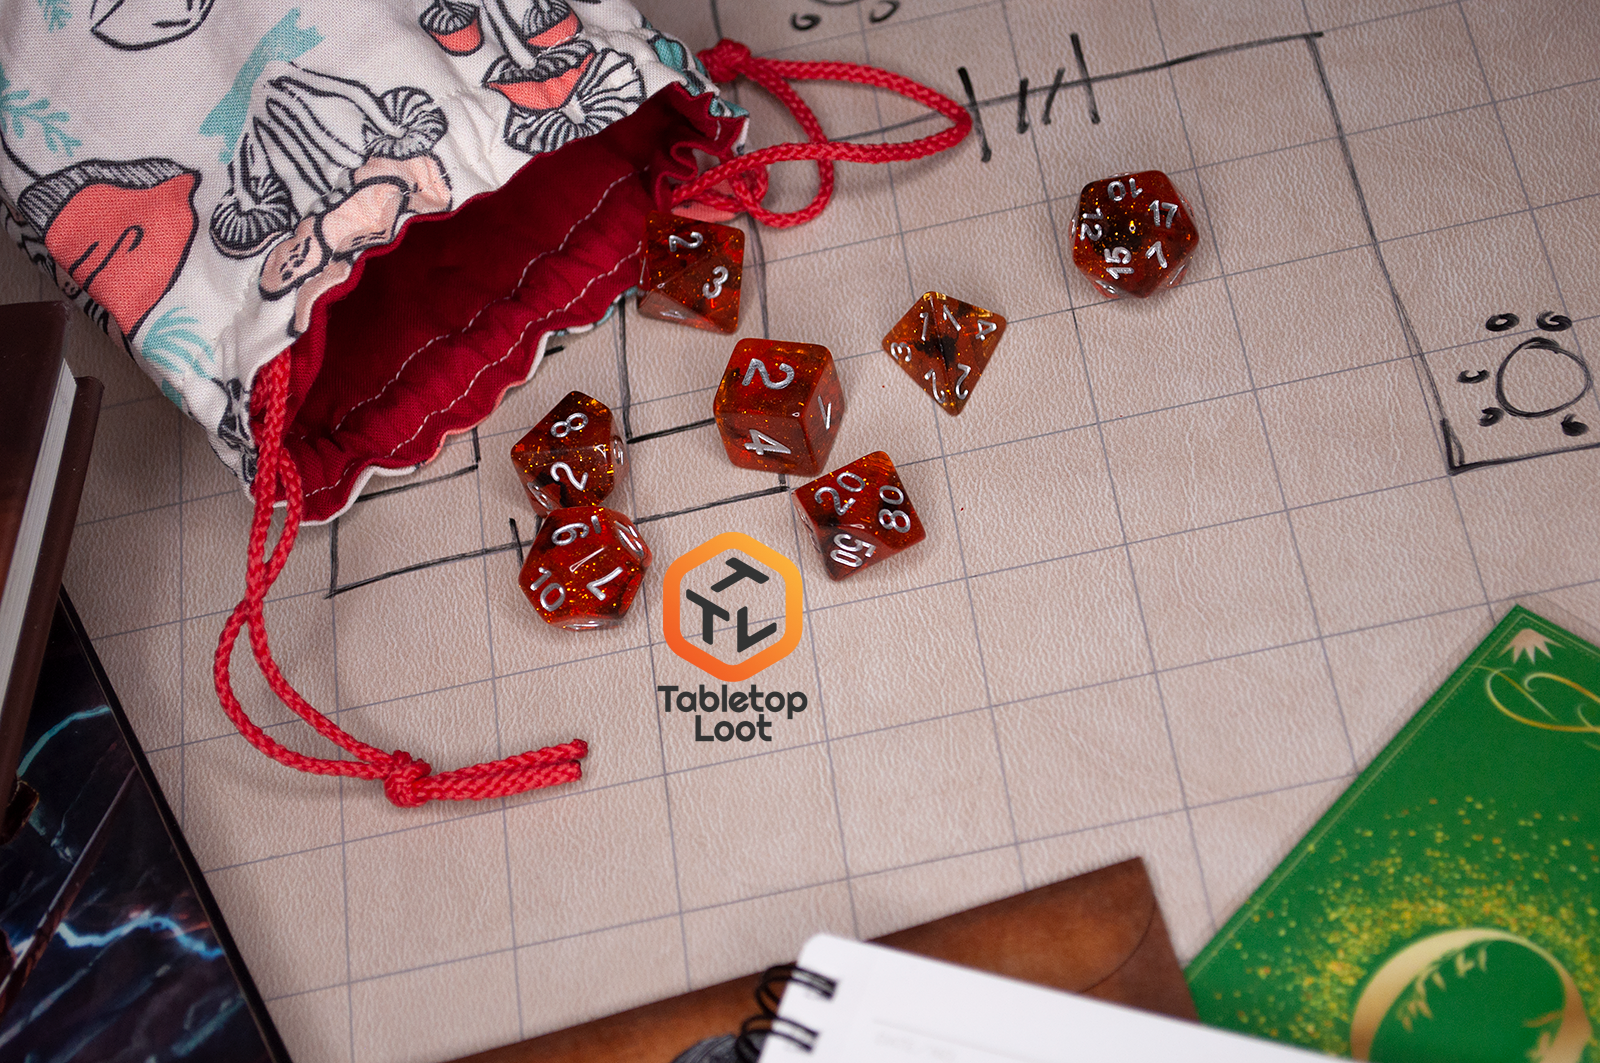 The Dissonant Whispers 7 piece dice set from Tabletop Loot with swirls of black in sparkling amber color, inked in silver, scattered on a gaming table.